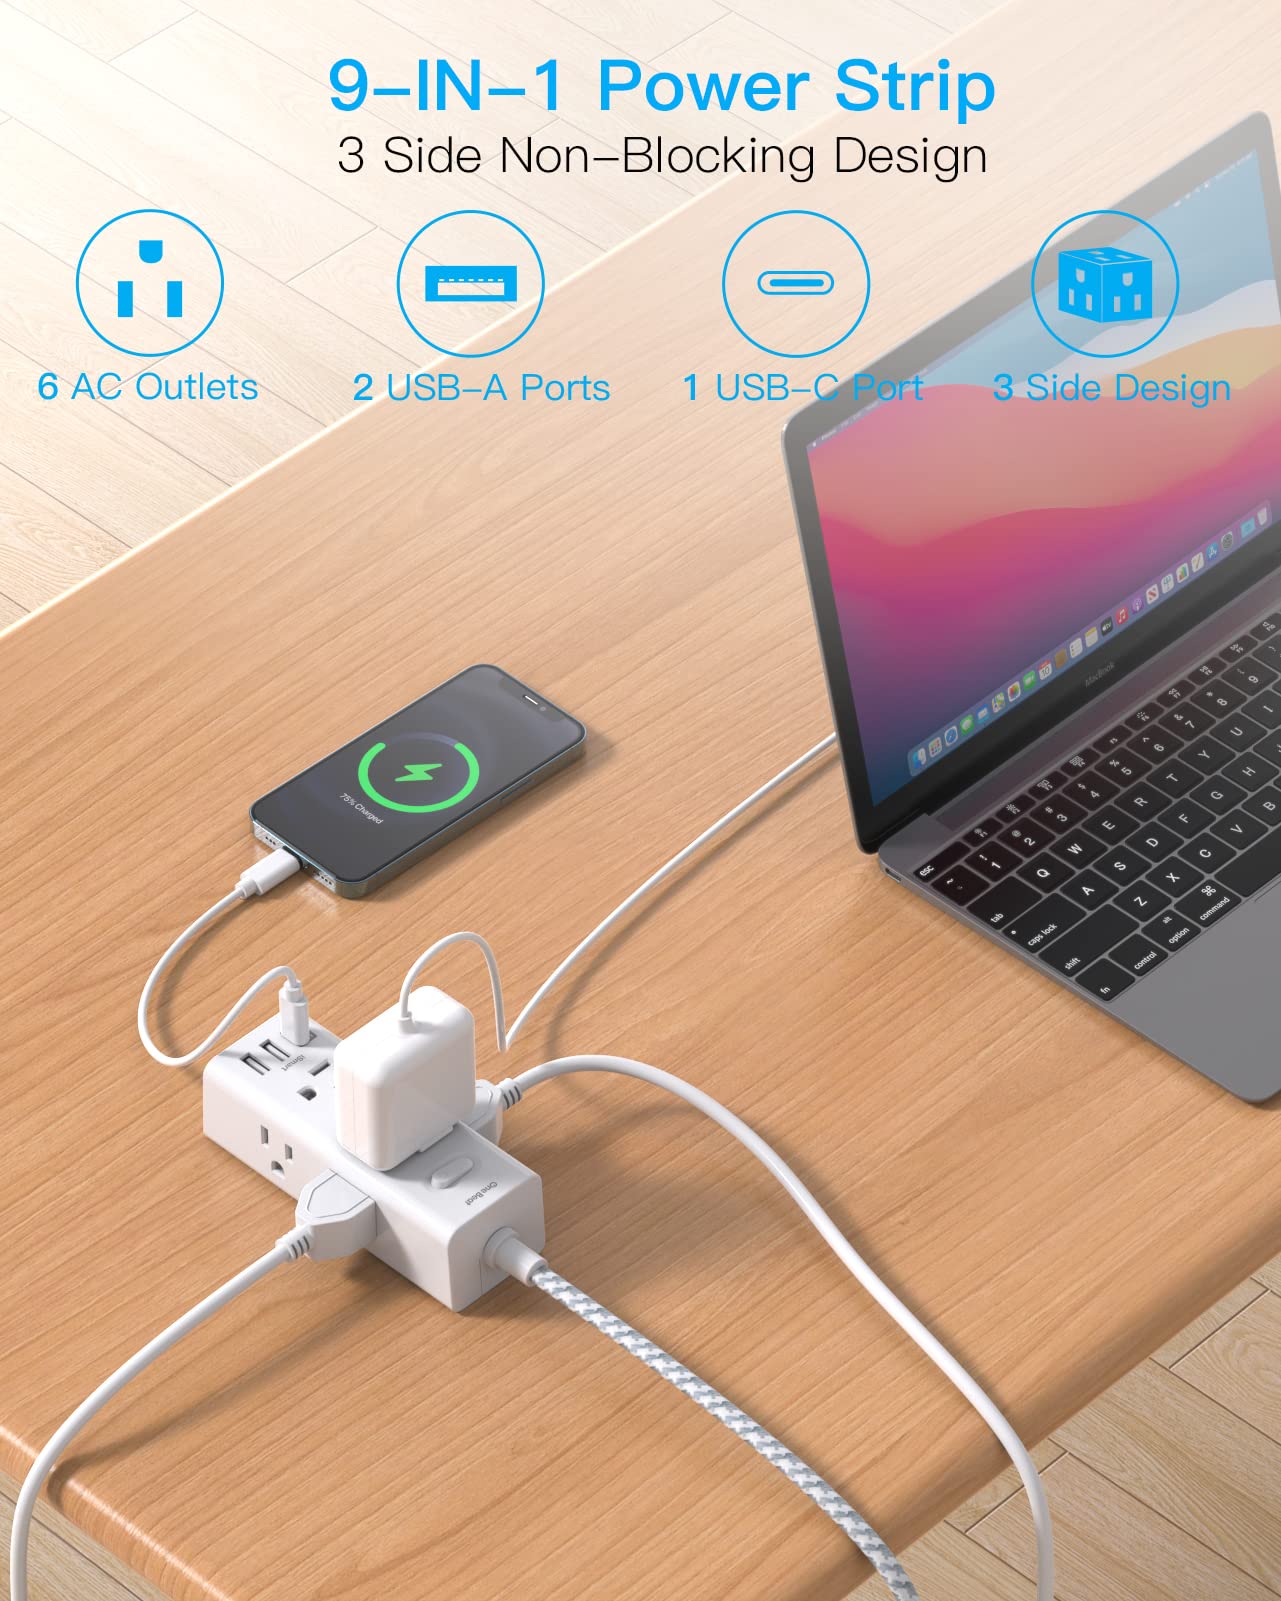 15 Ft Power Strip Surge Protector, Extension Cord with 6 Widely Outlets 3 USB Ports (1 USB C), 3-Side Outlet Extender Strip, Flat Plug, Wall Mount, Small Power Strip for Travel Office Dorm Home